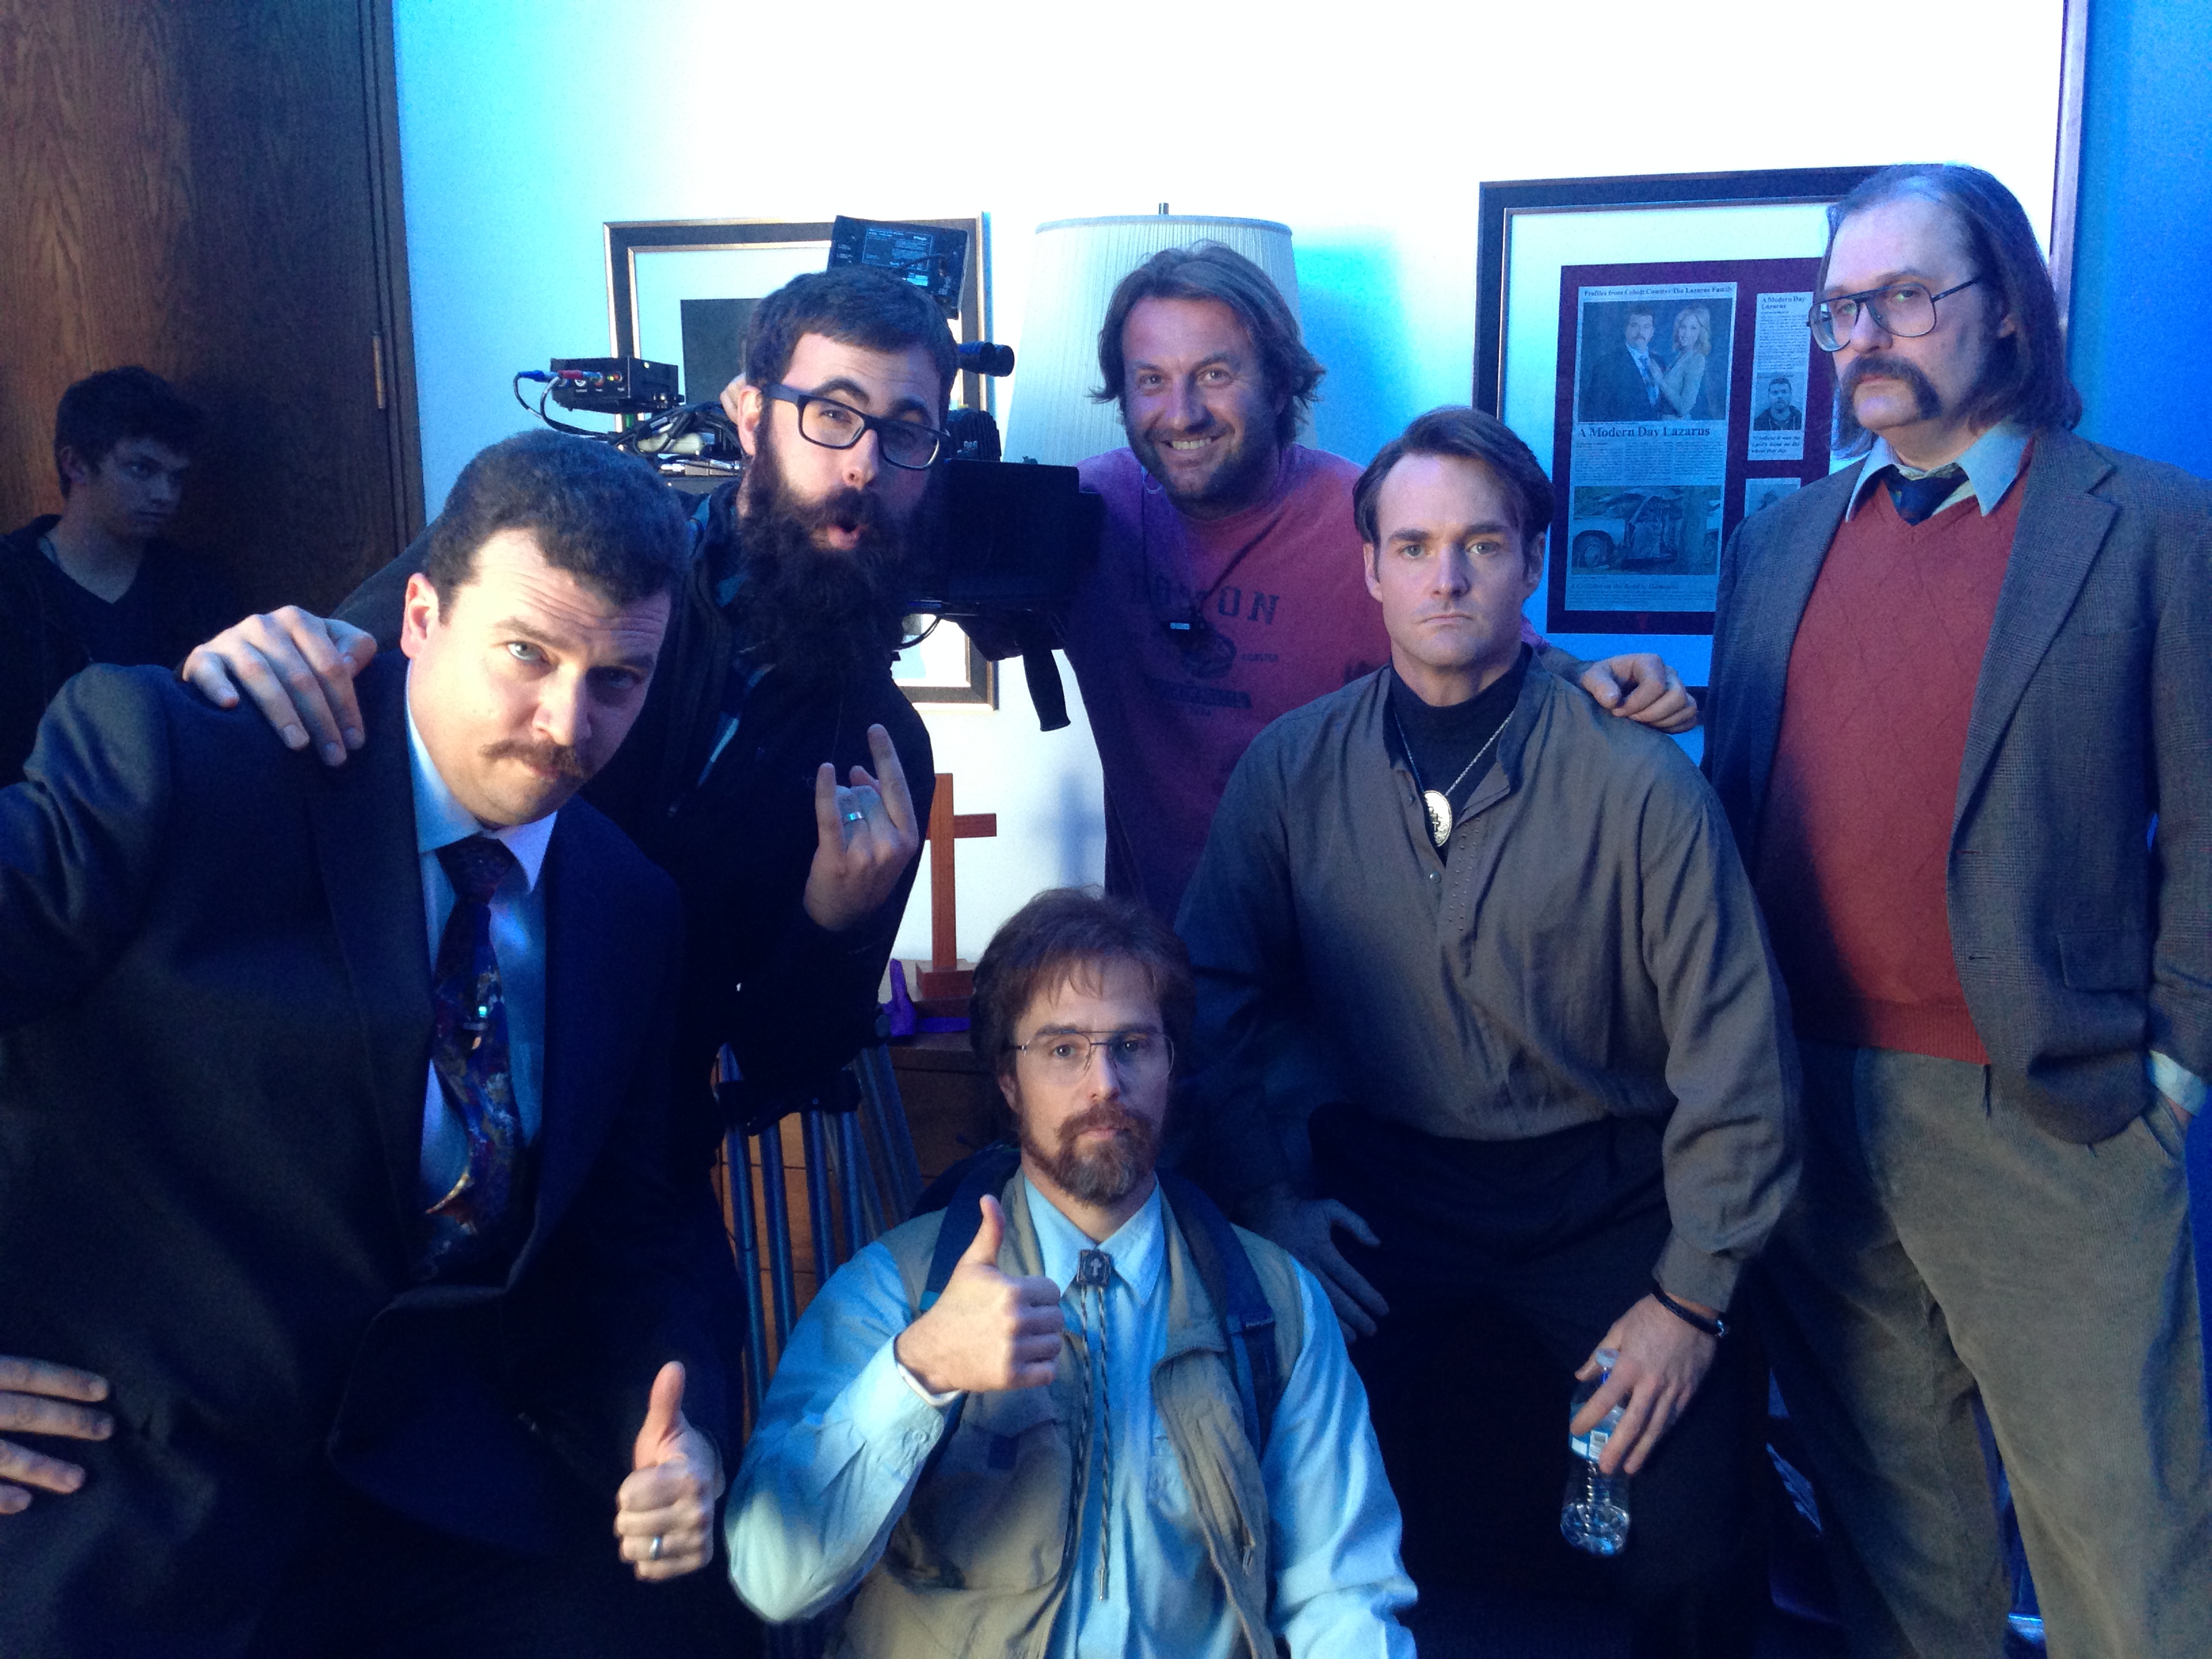 Sky Elobar, Will Forte, cameraman, Sam Rockwell, Jared Hess, and Danny McBride on the set of Don Verdean!